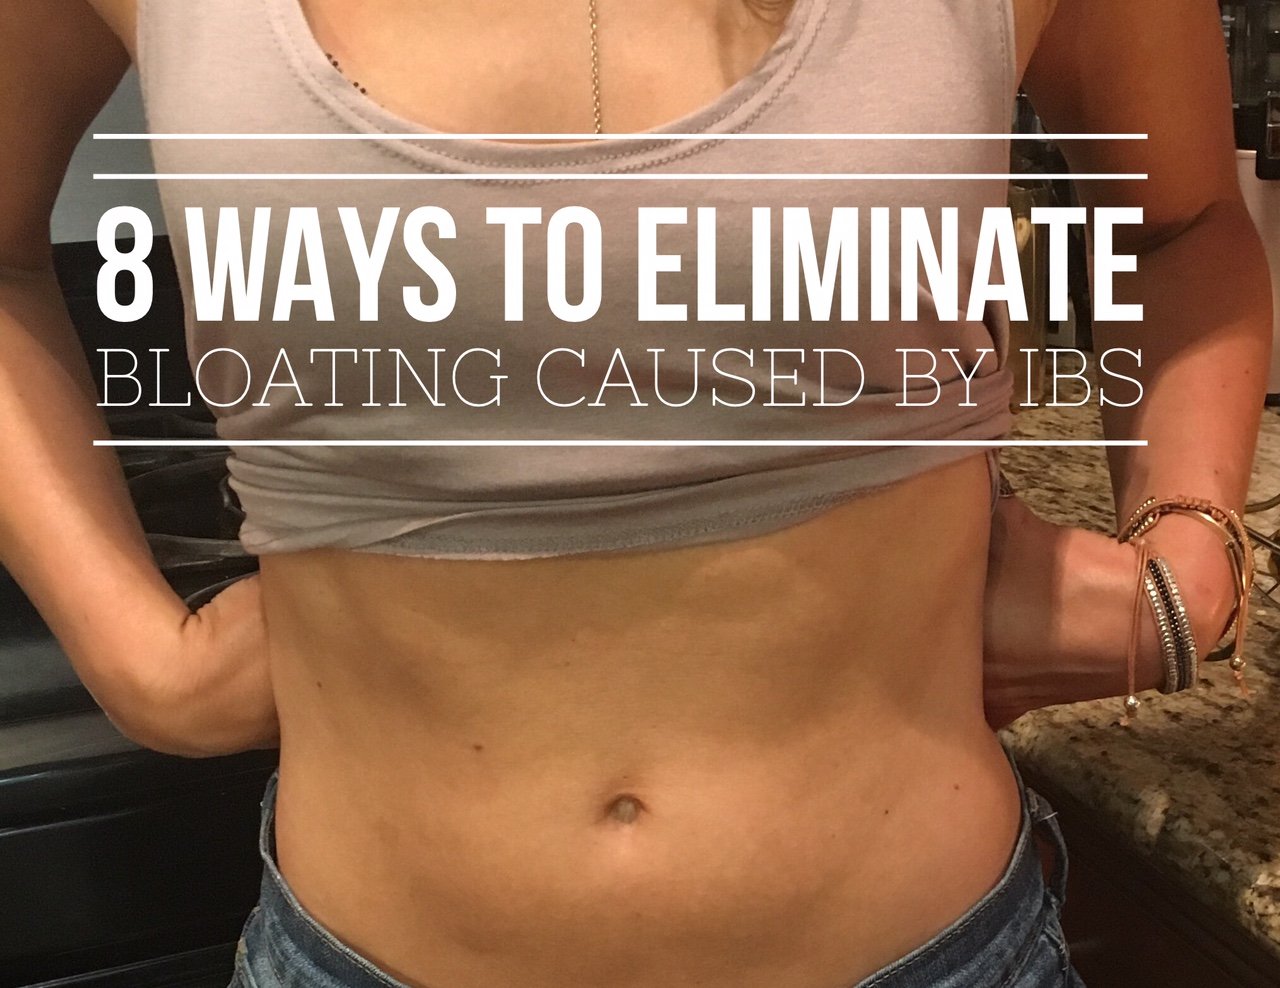 8 Ways to Eliminate Bloating Caused by IBS